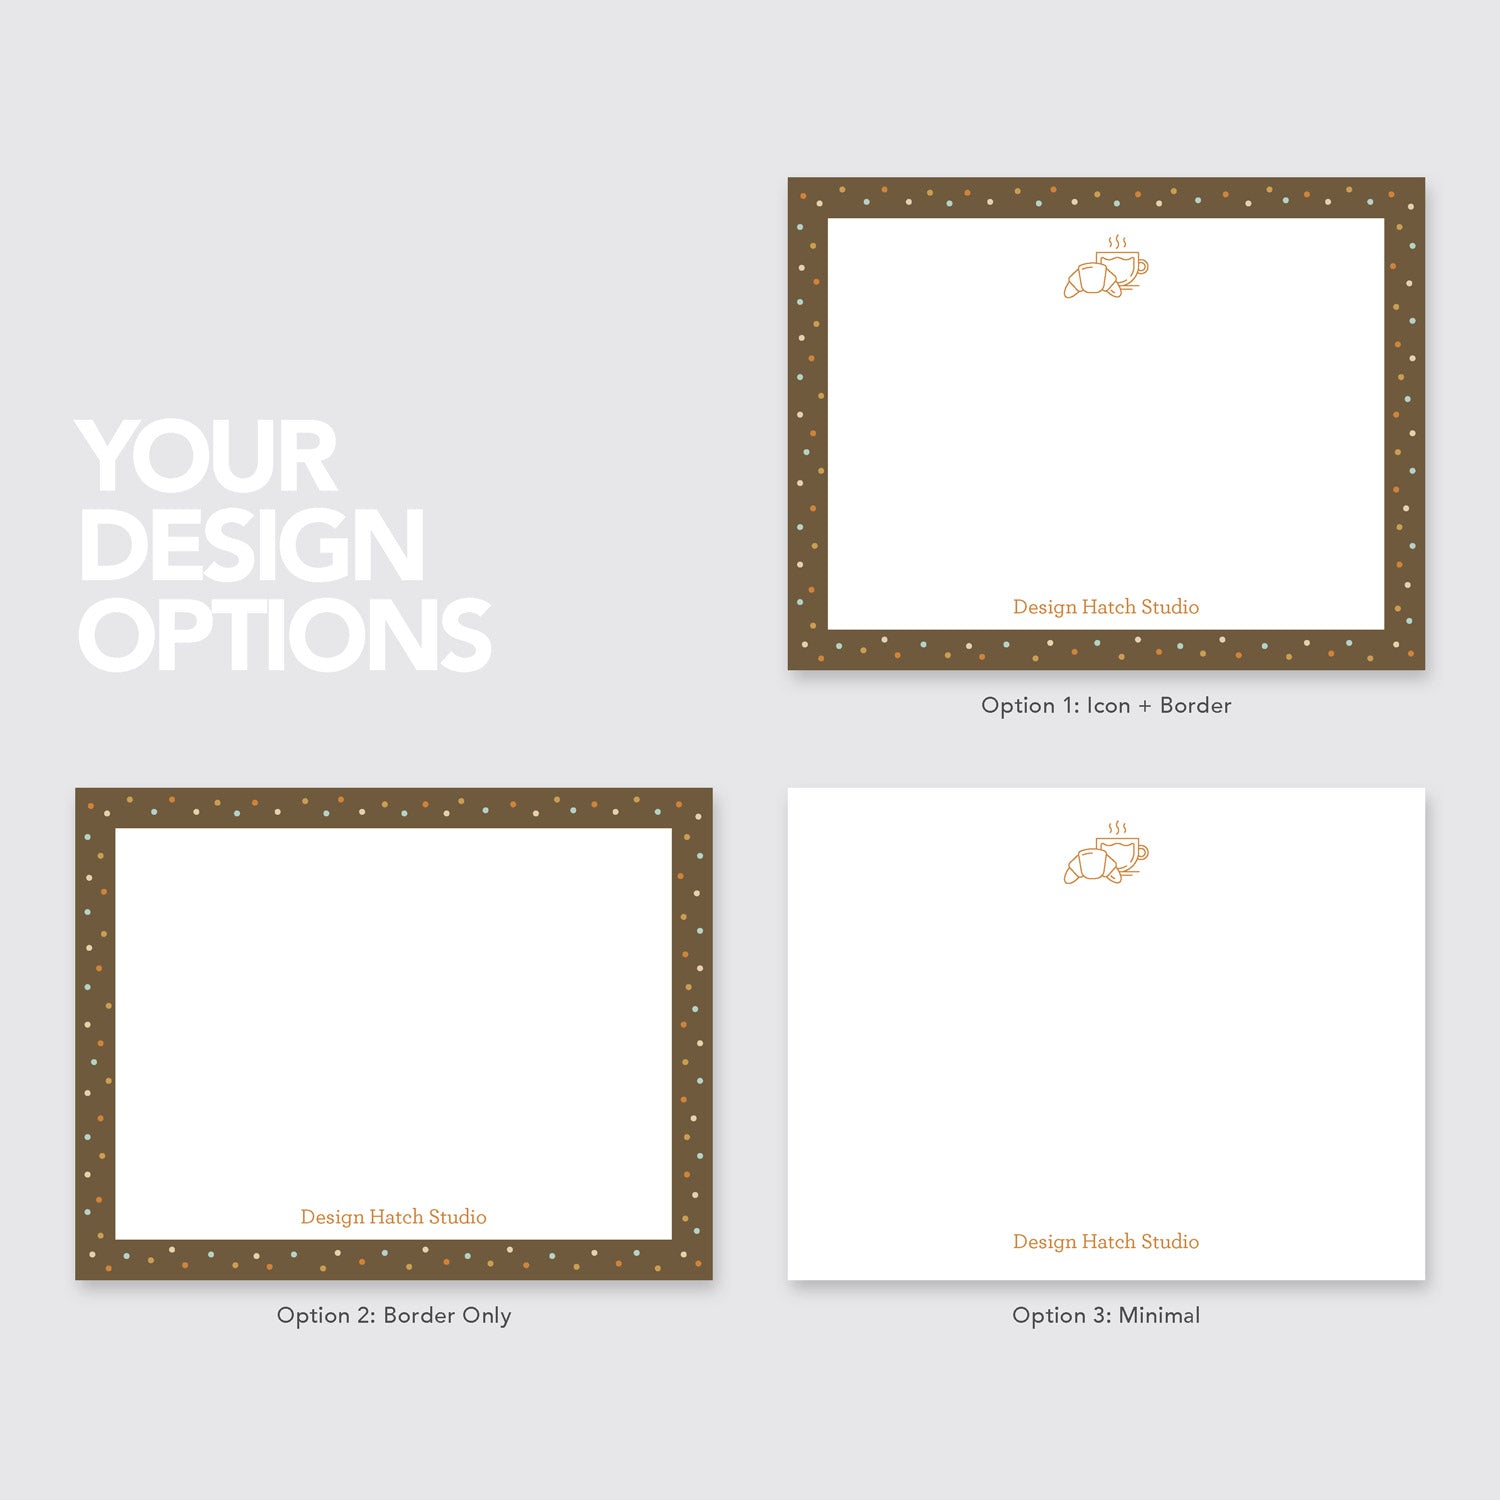 Coffee - Custom Stationery - 24 flat cards with envelopes - Design Hatch Studio